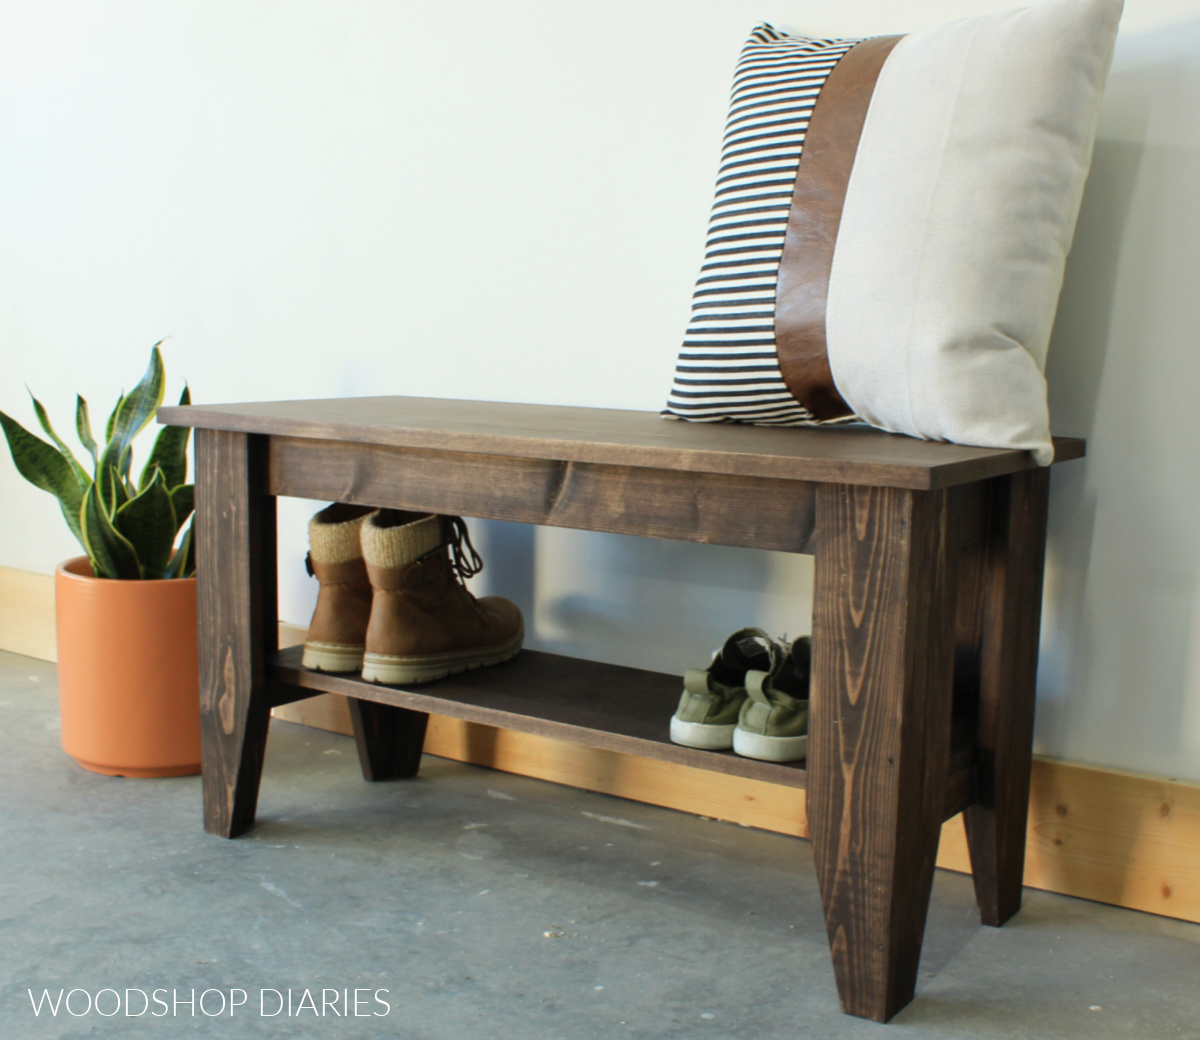 Completed simple DIY bench project with shoe shelf stained dark brown